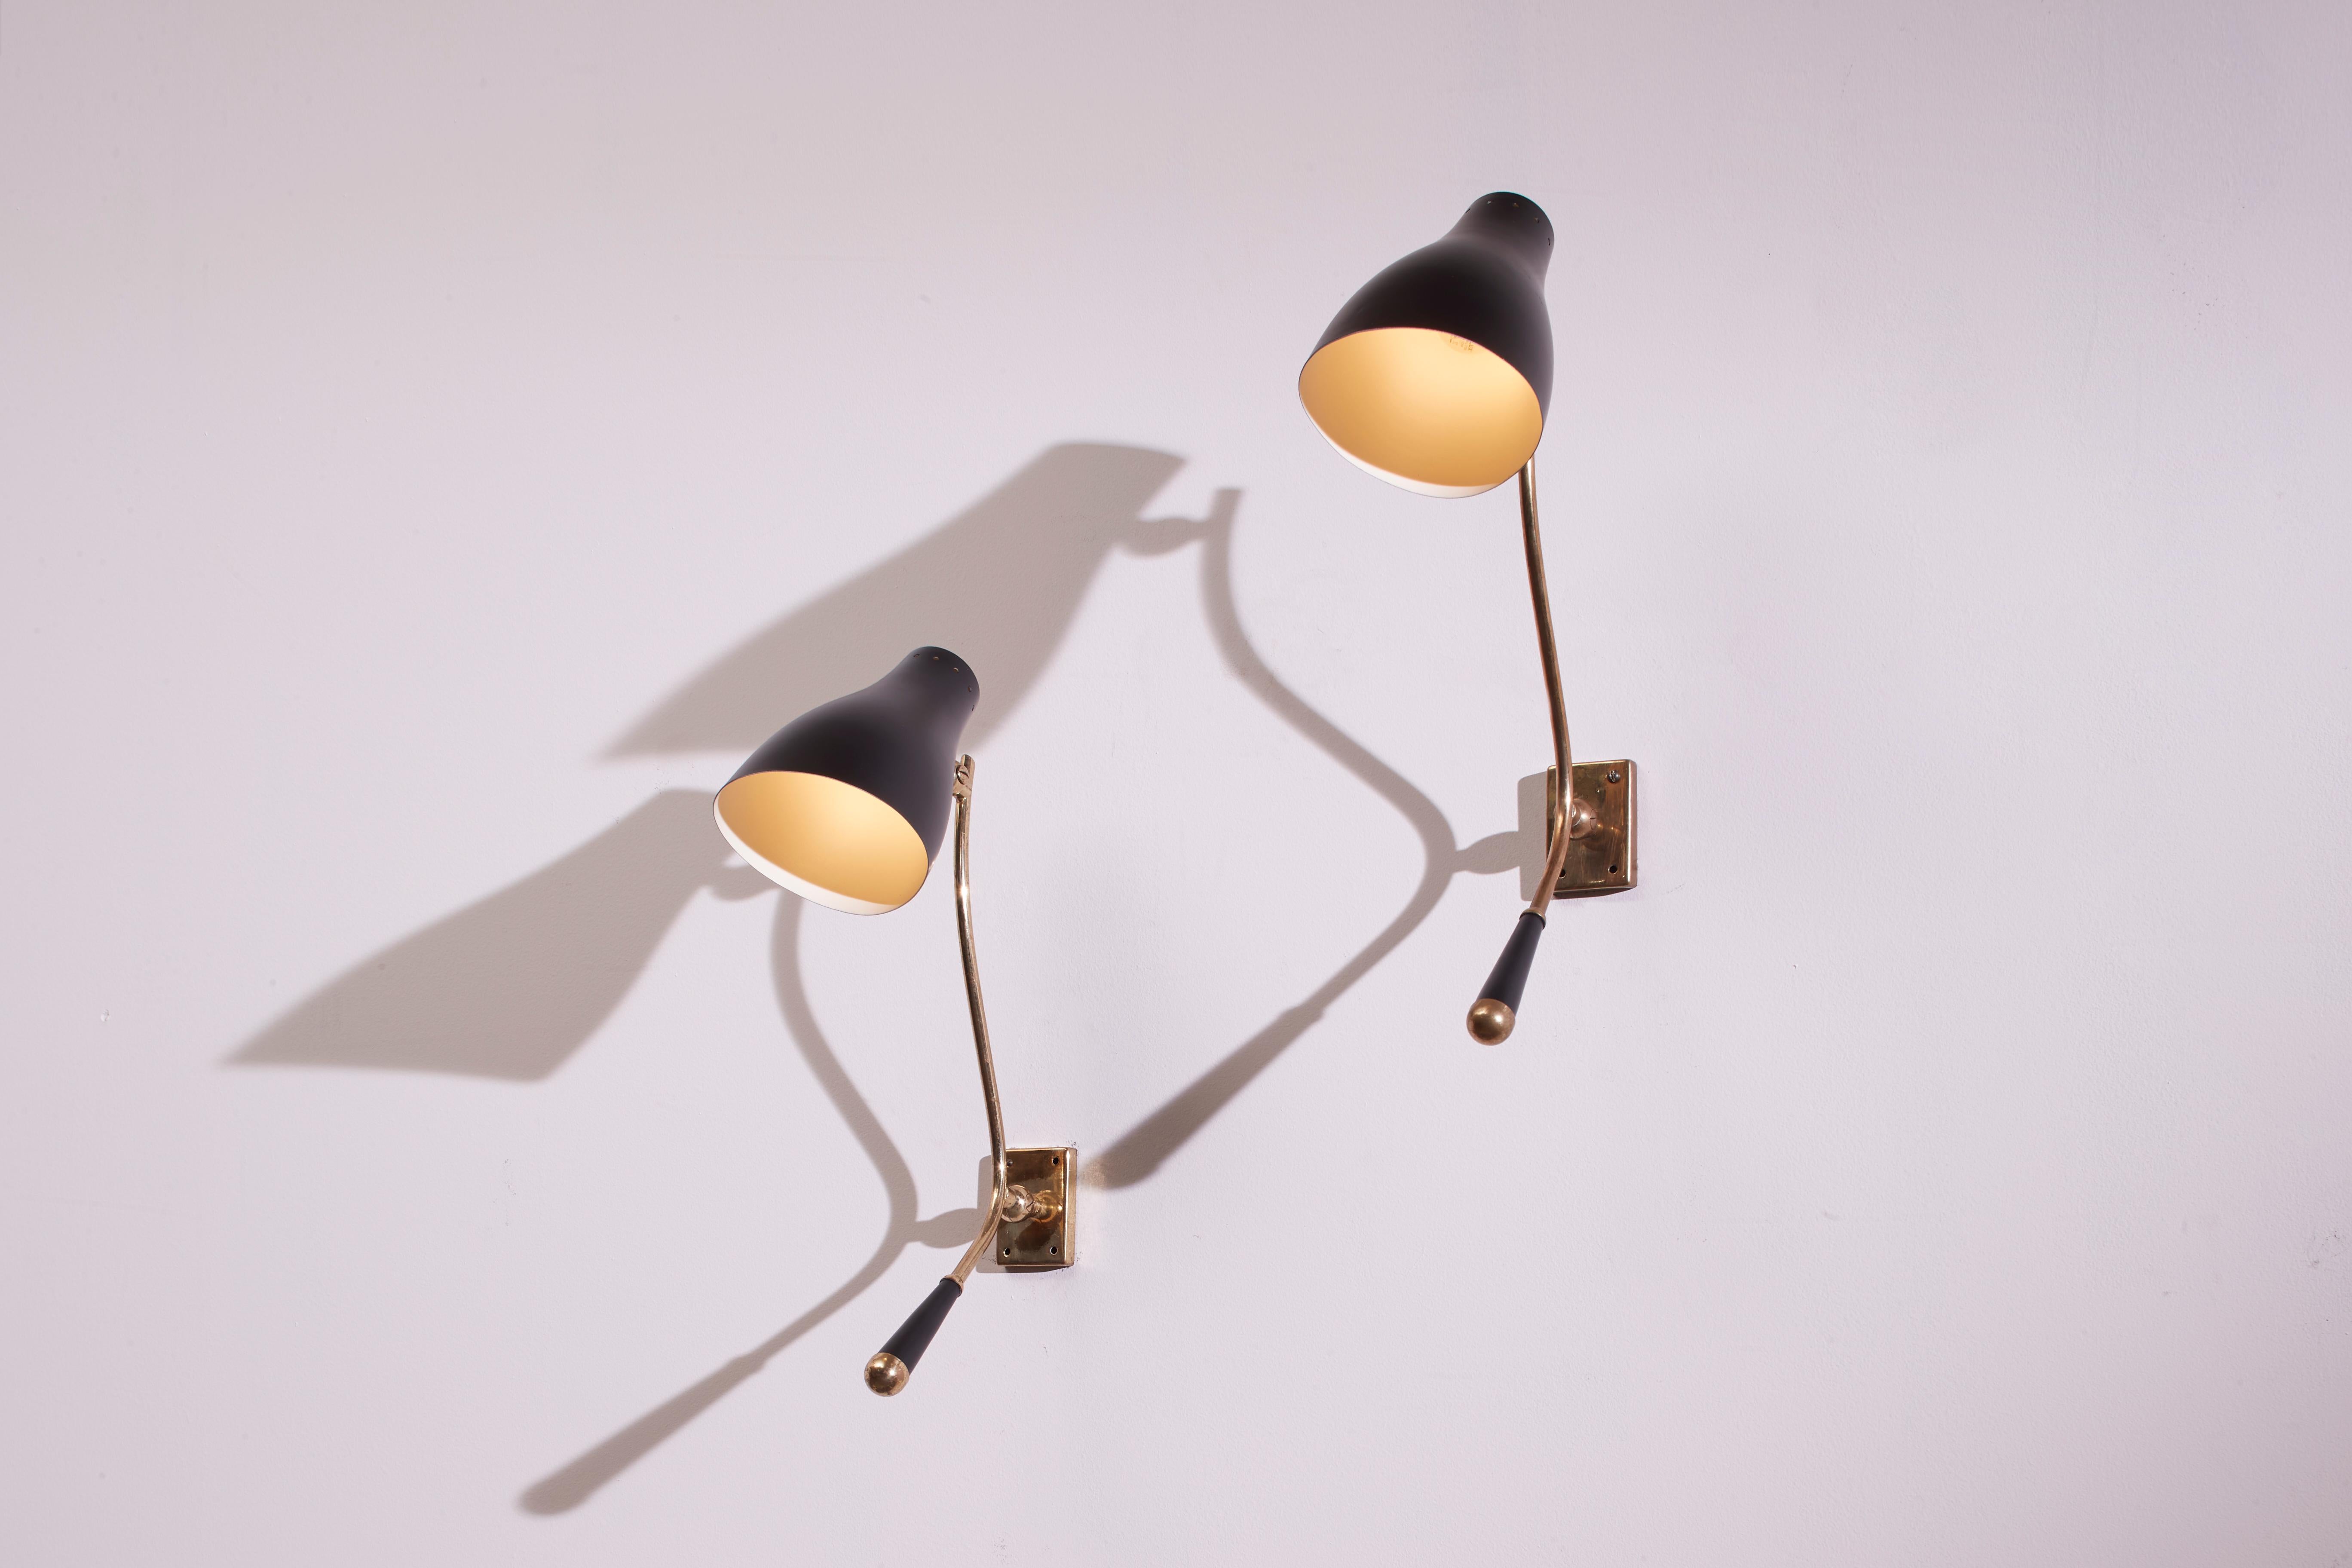 An elegant pair of 1950s wall lamps, made of brass and painted metal, attributed to Stilnovo.

These significant-sized wall sconces stand out for their successful design of the handle, which allows for convenient adjustment of the light direction.